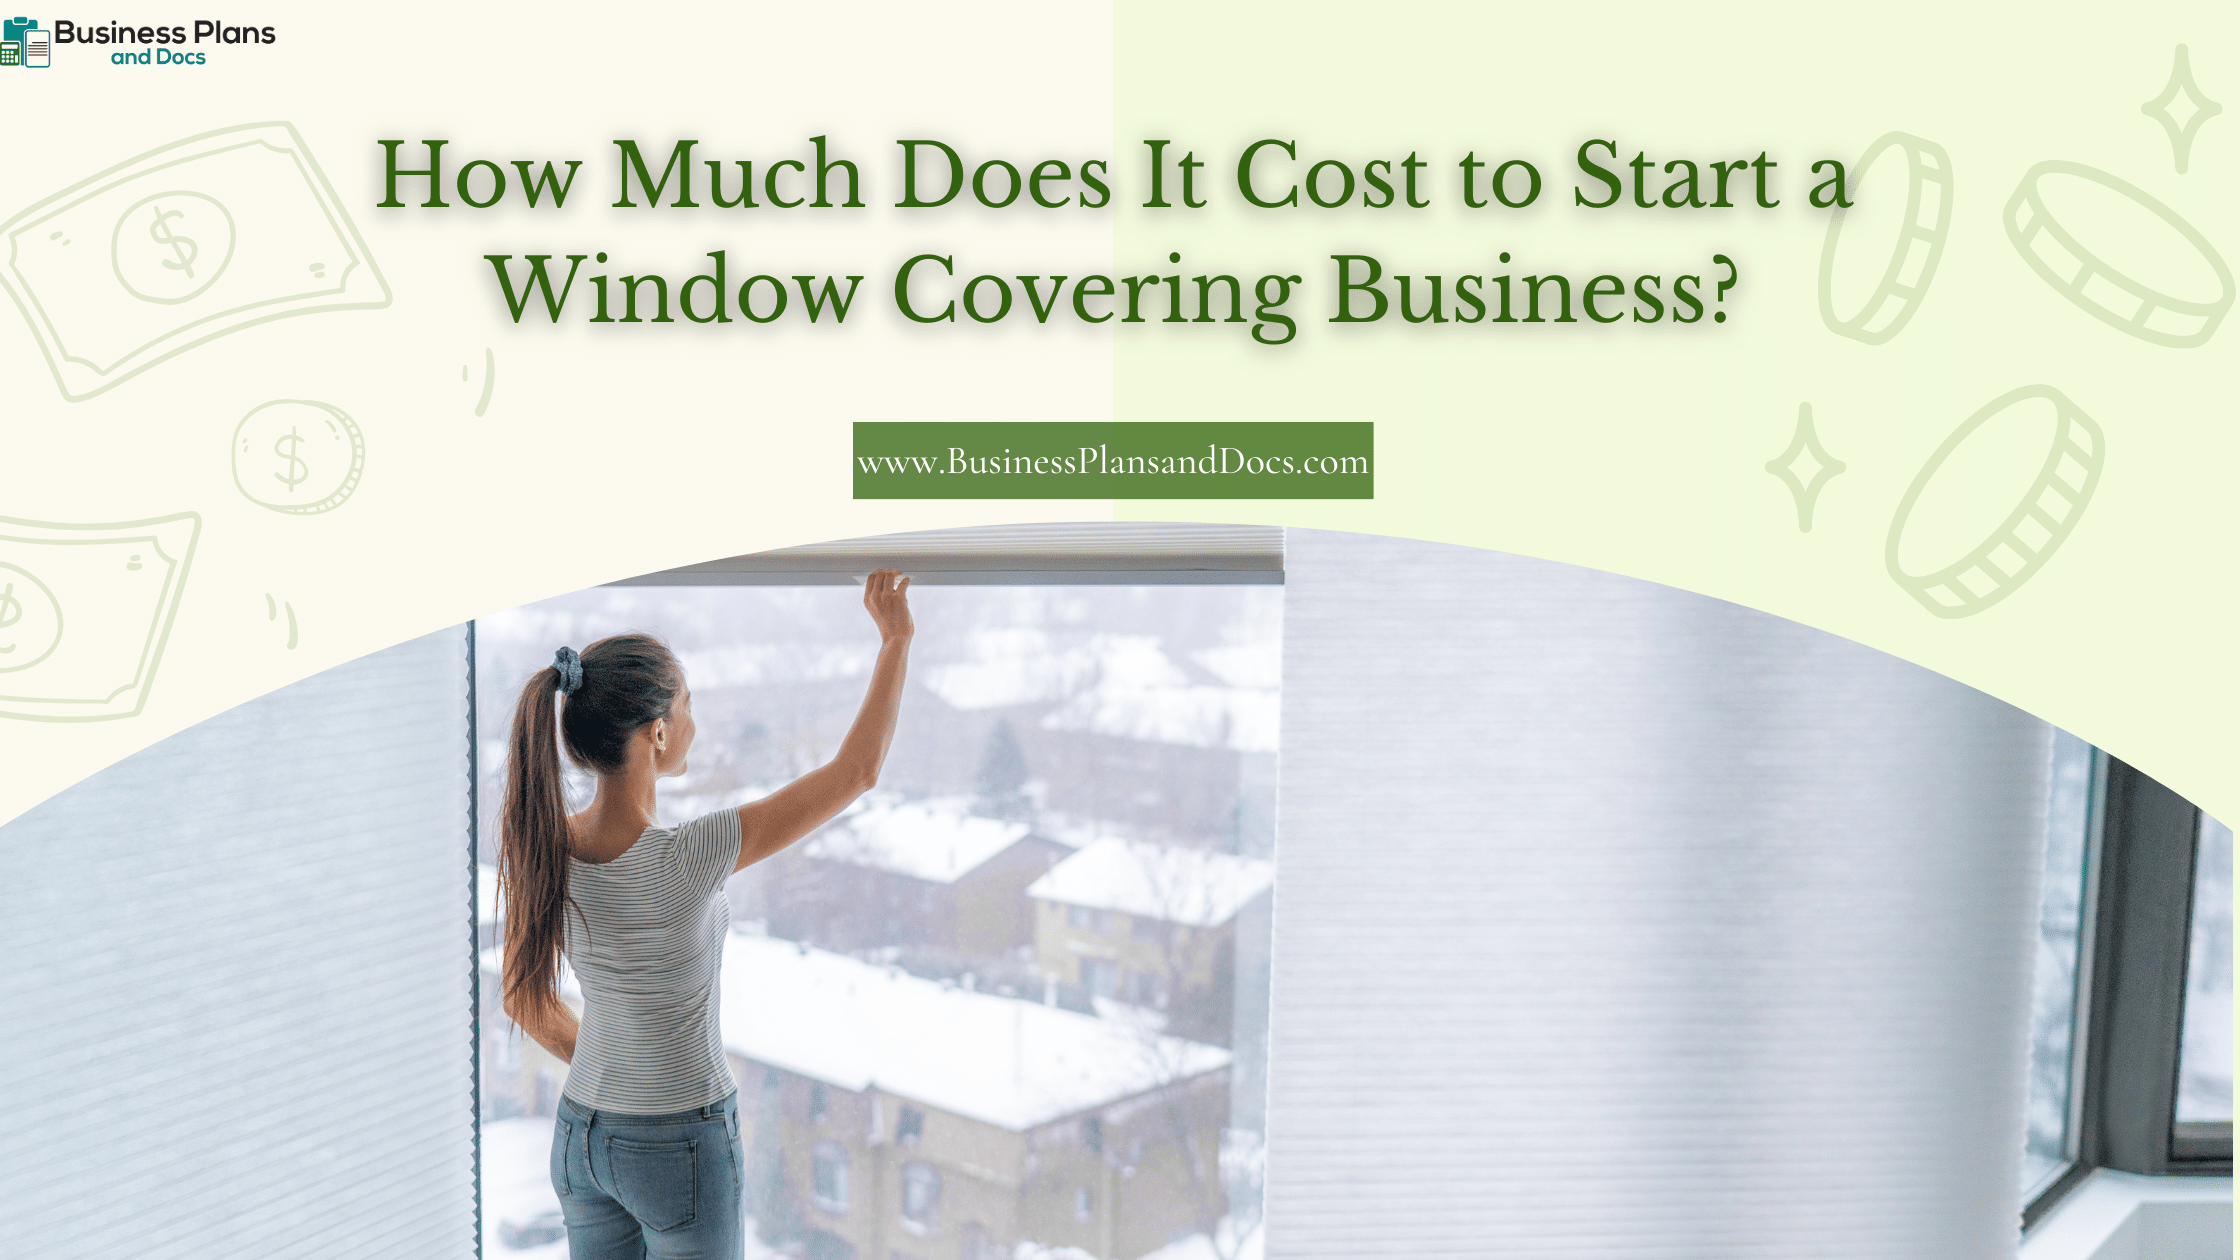 How Much Does It Cost to Start a Window Covering Business?